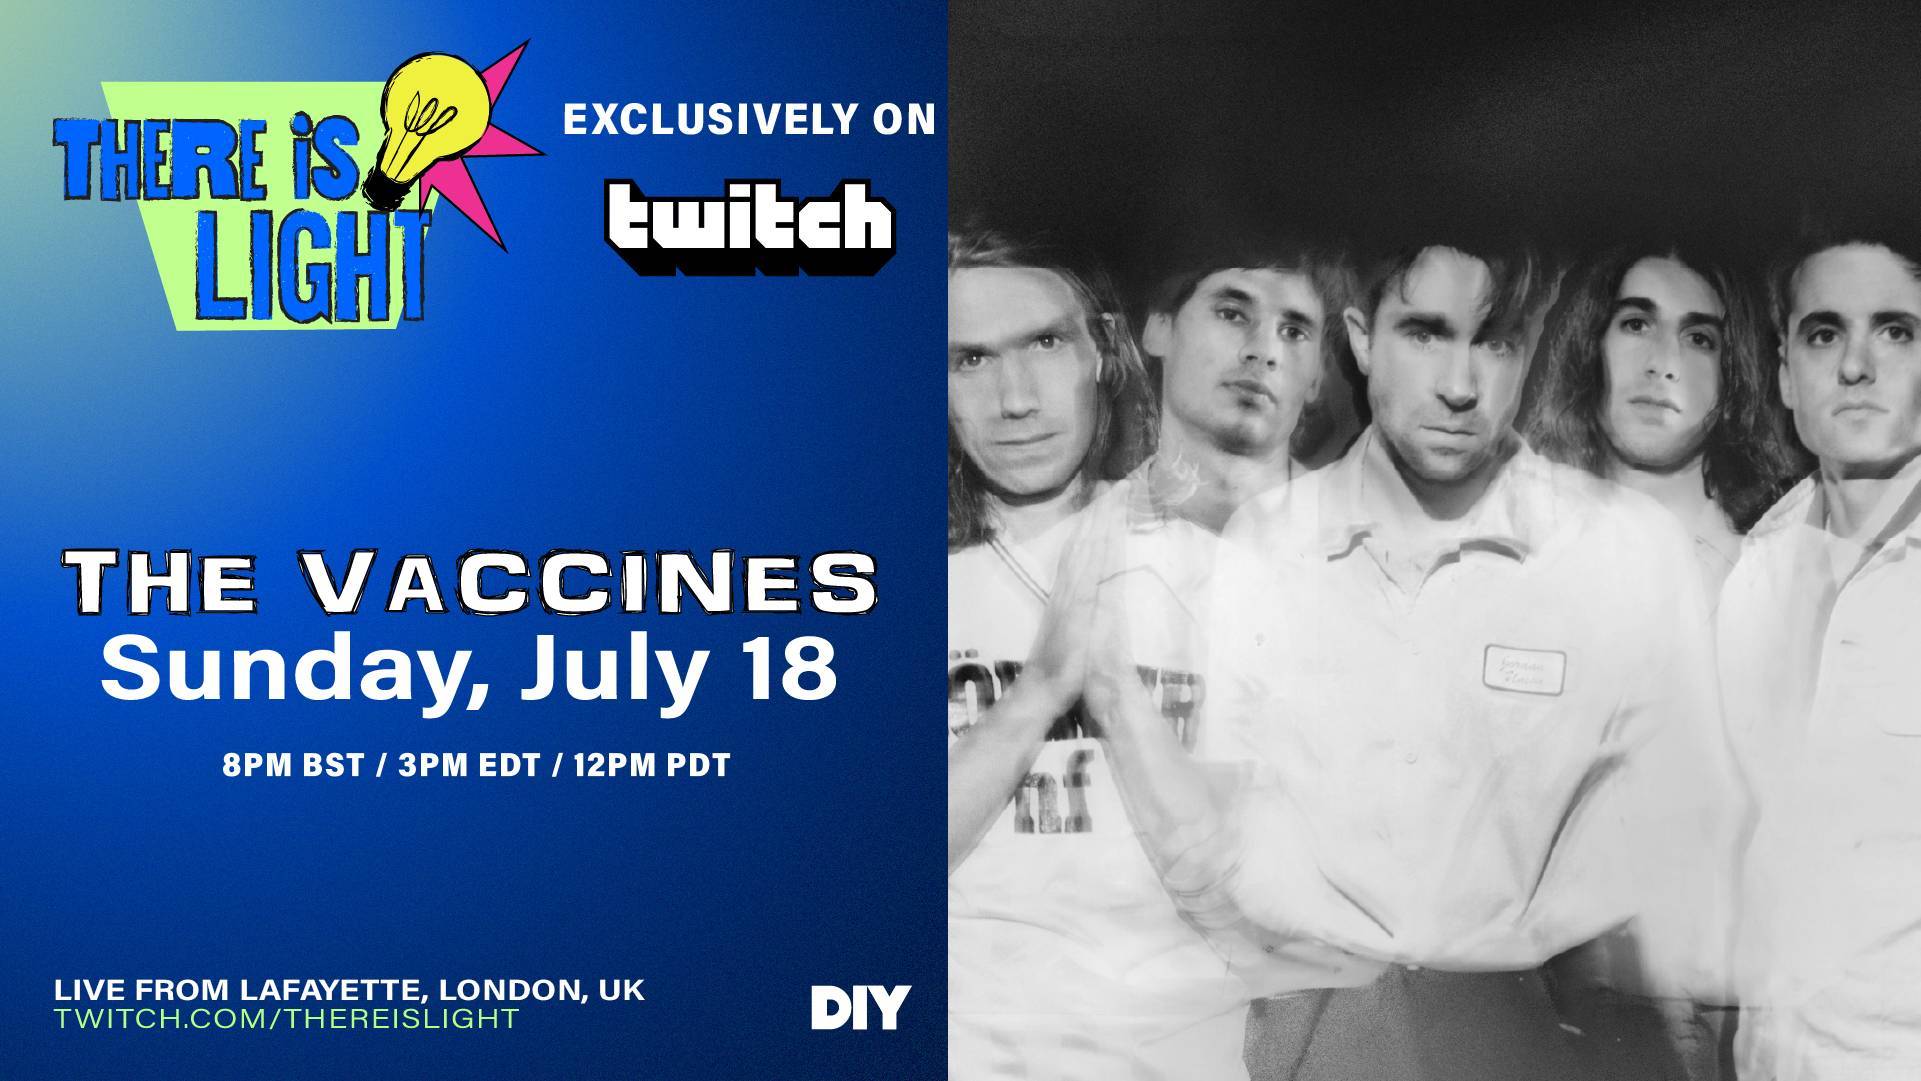 The Vaccines to play this weekend's There is Light stream